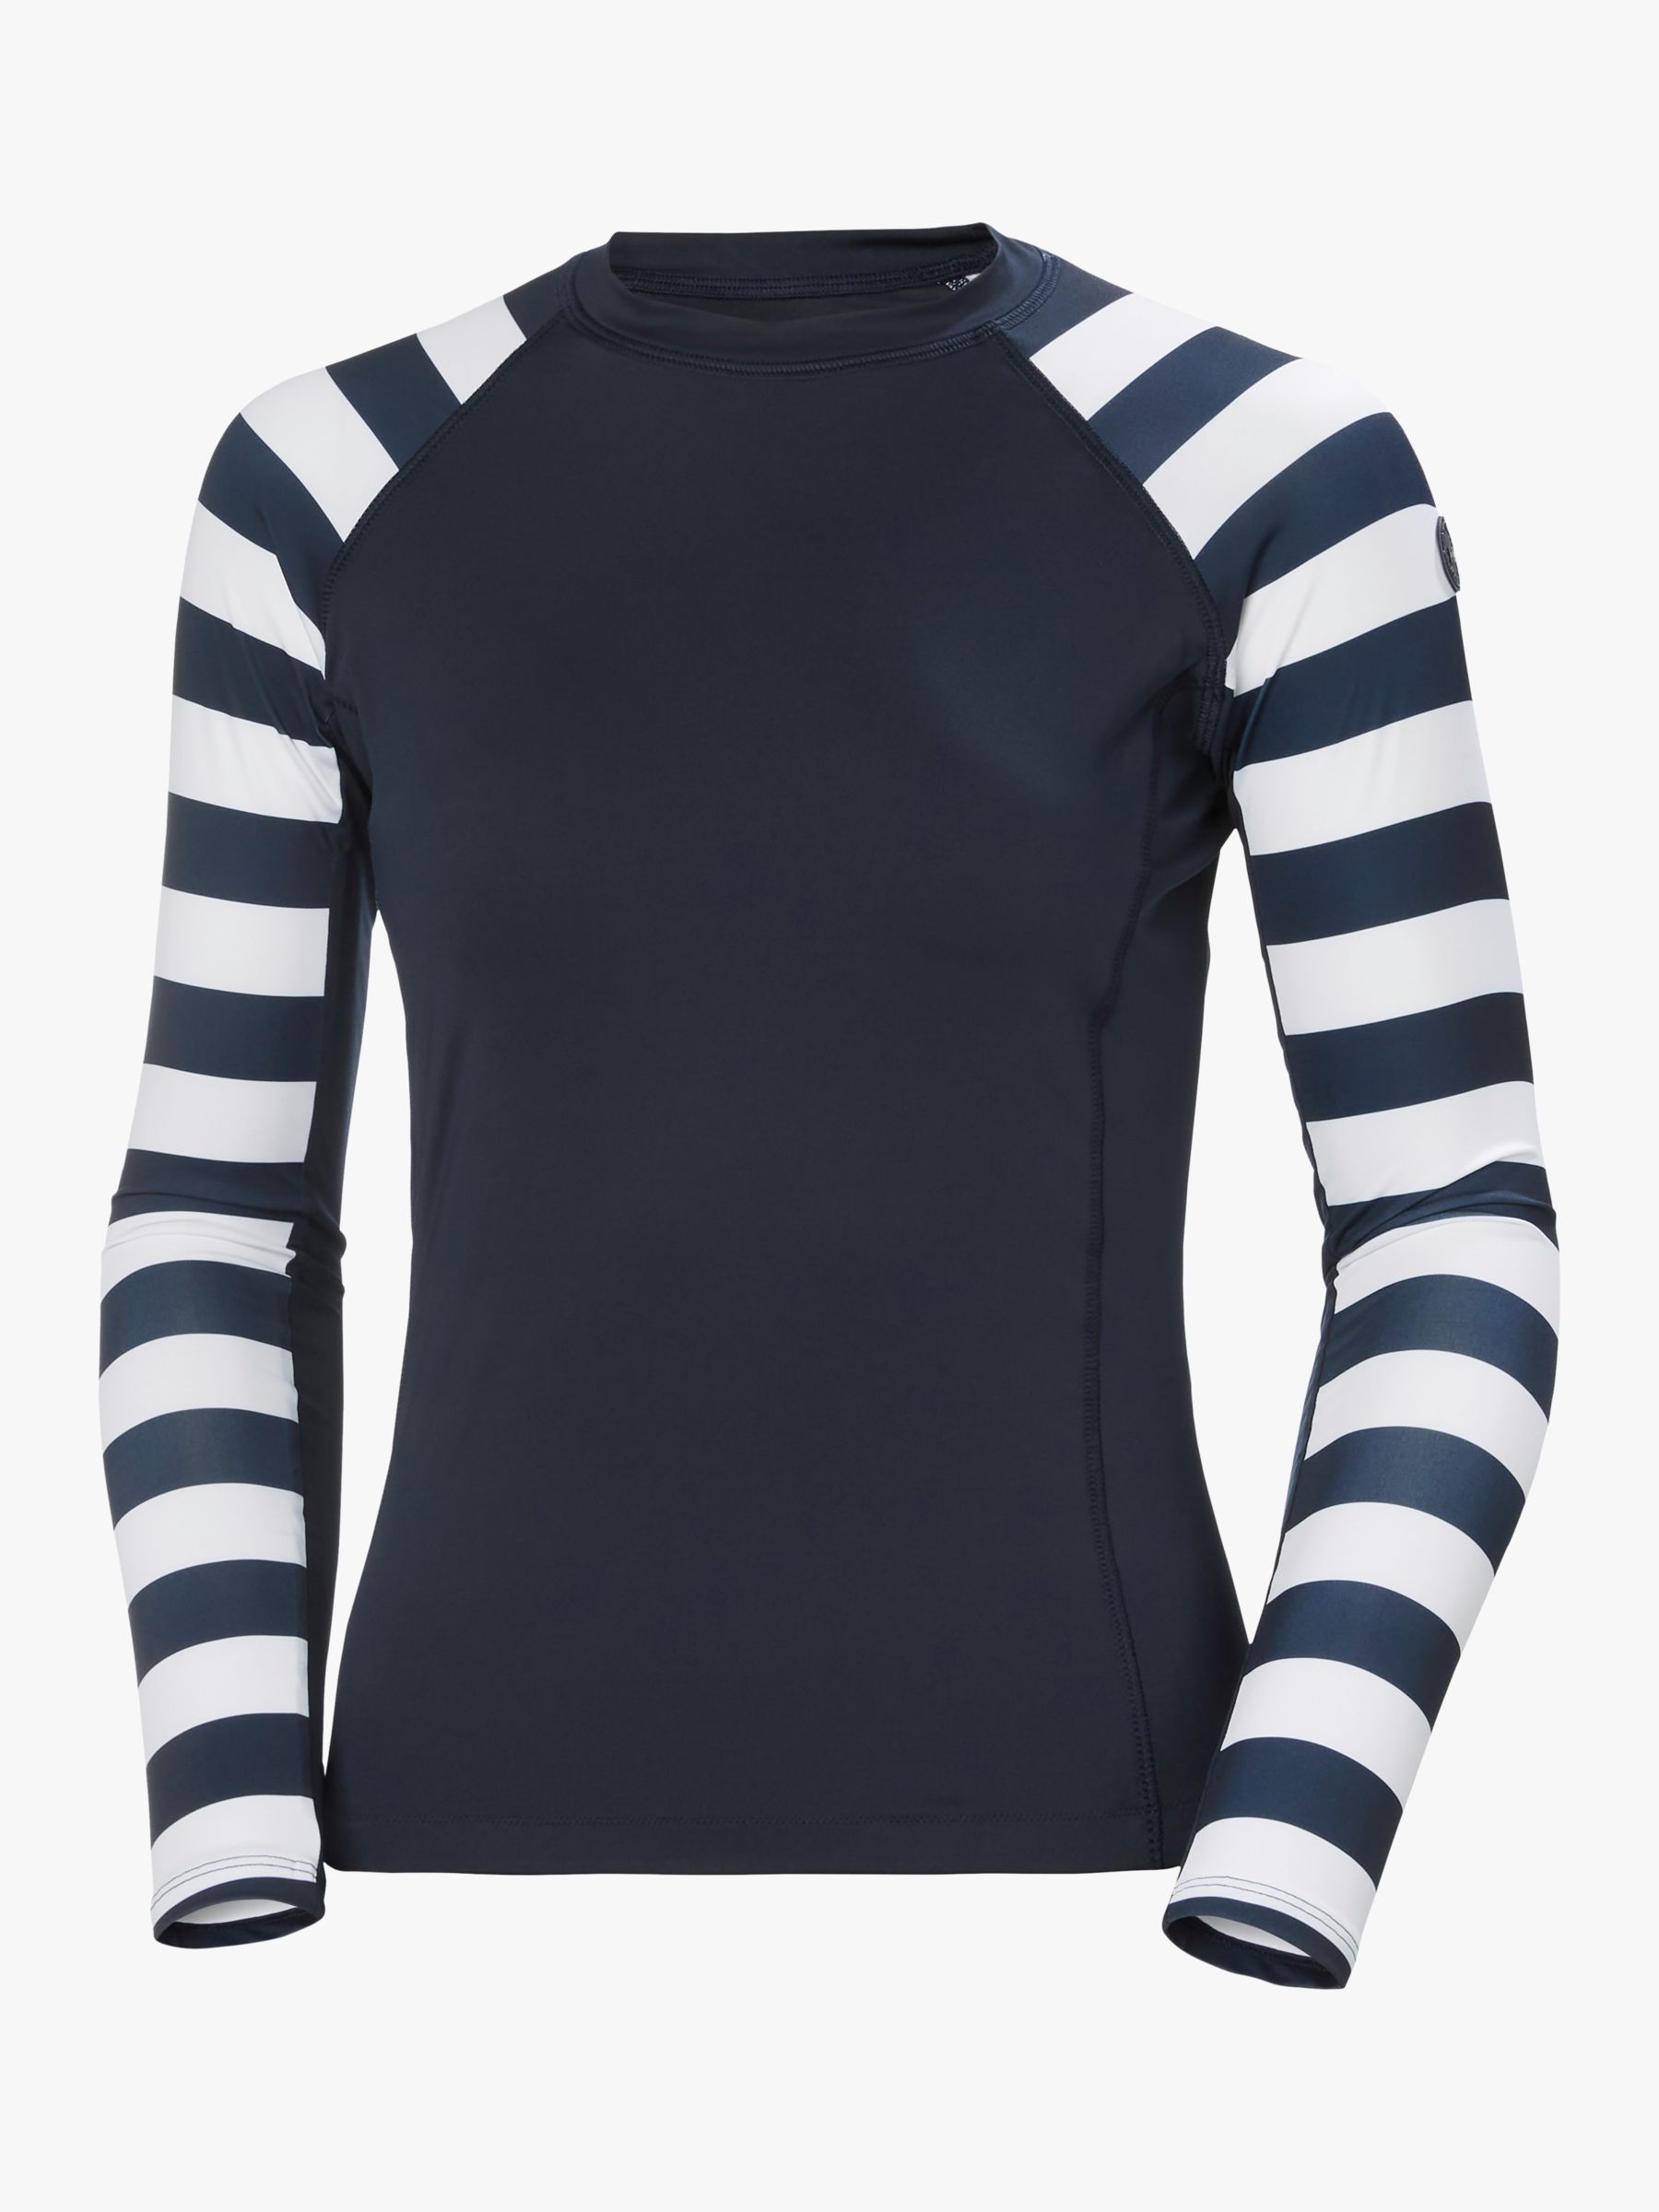 Buy Helly Hansen UPF 50+ Recycled Striped Swim Top, Navy/White Online at johnlewis.com